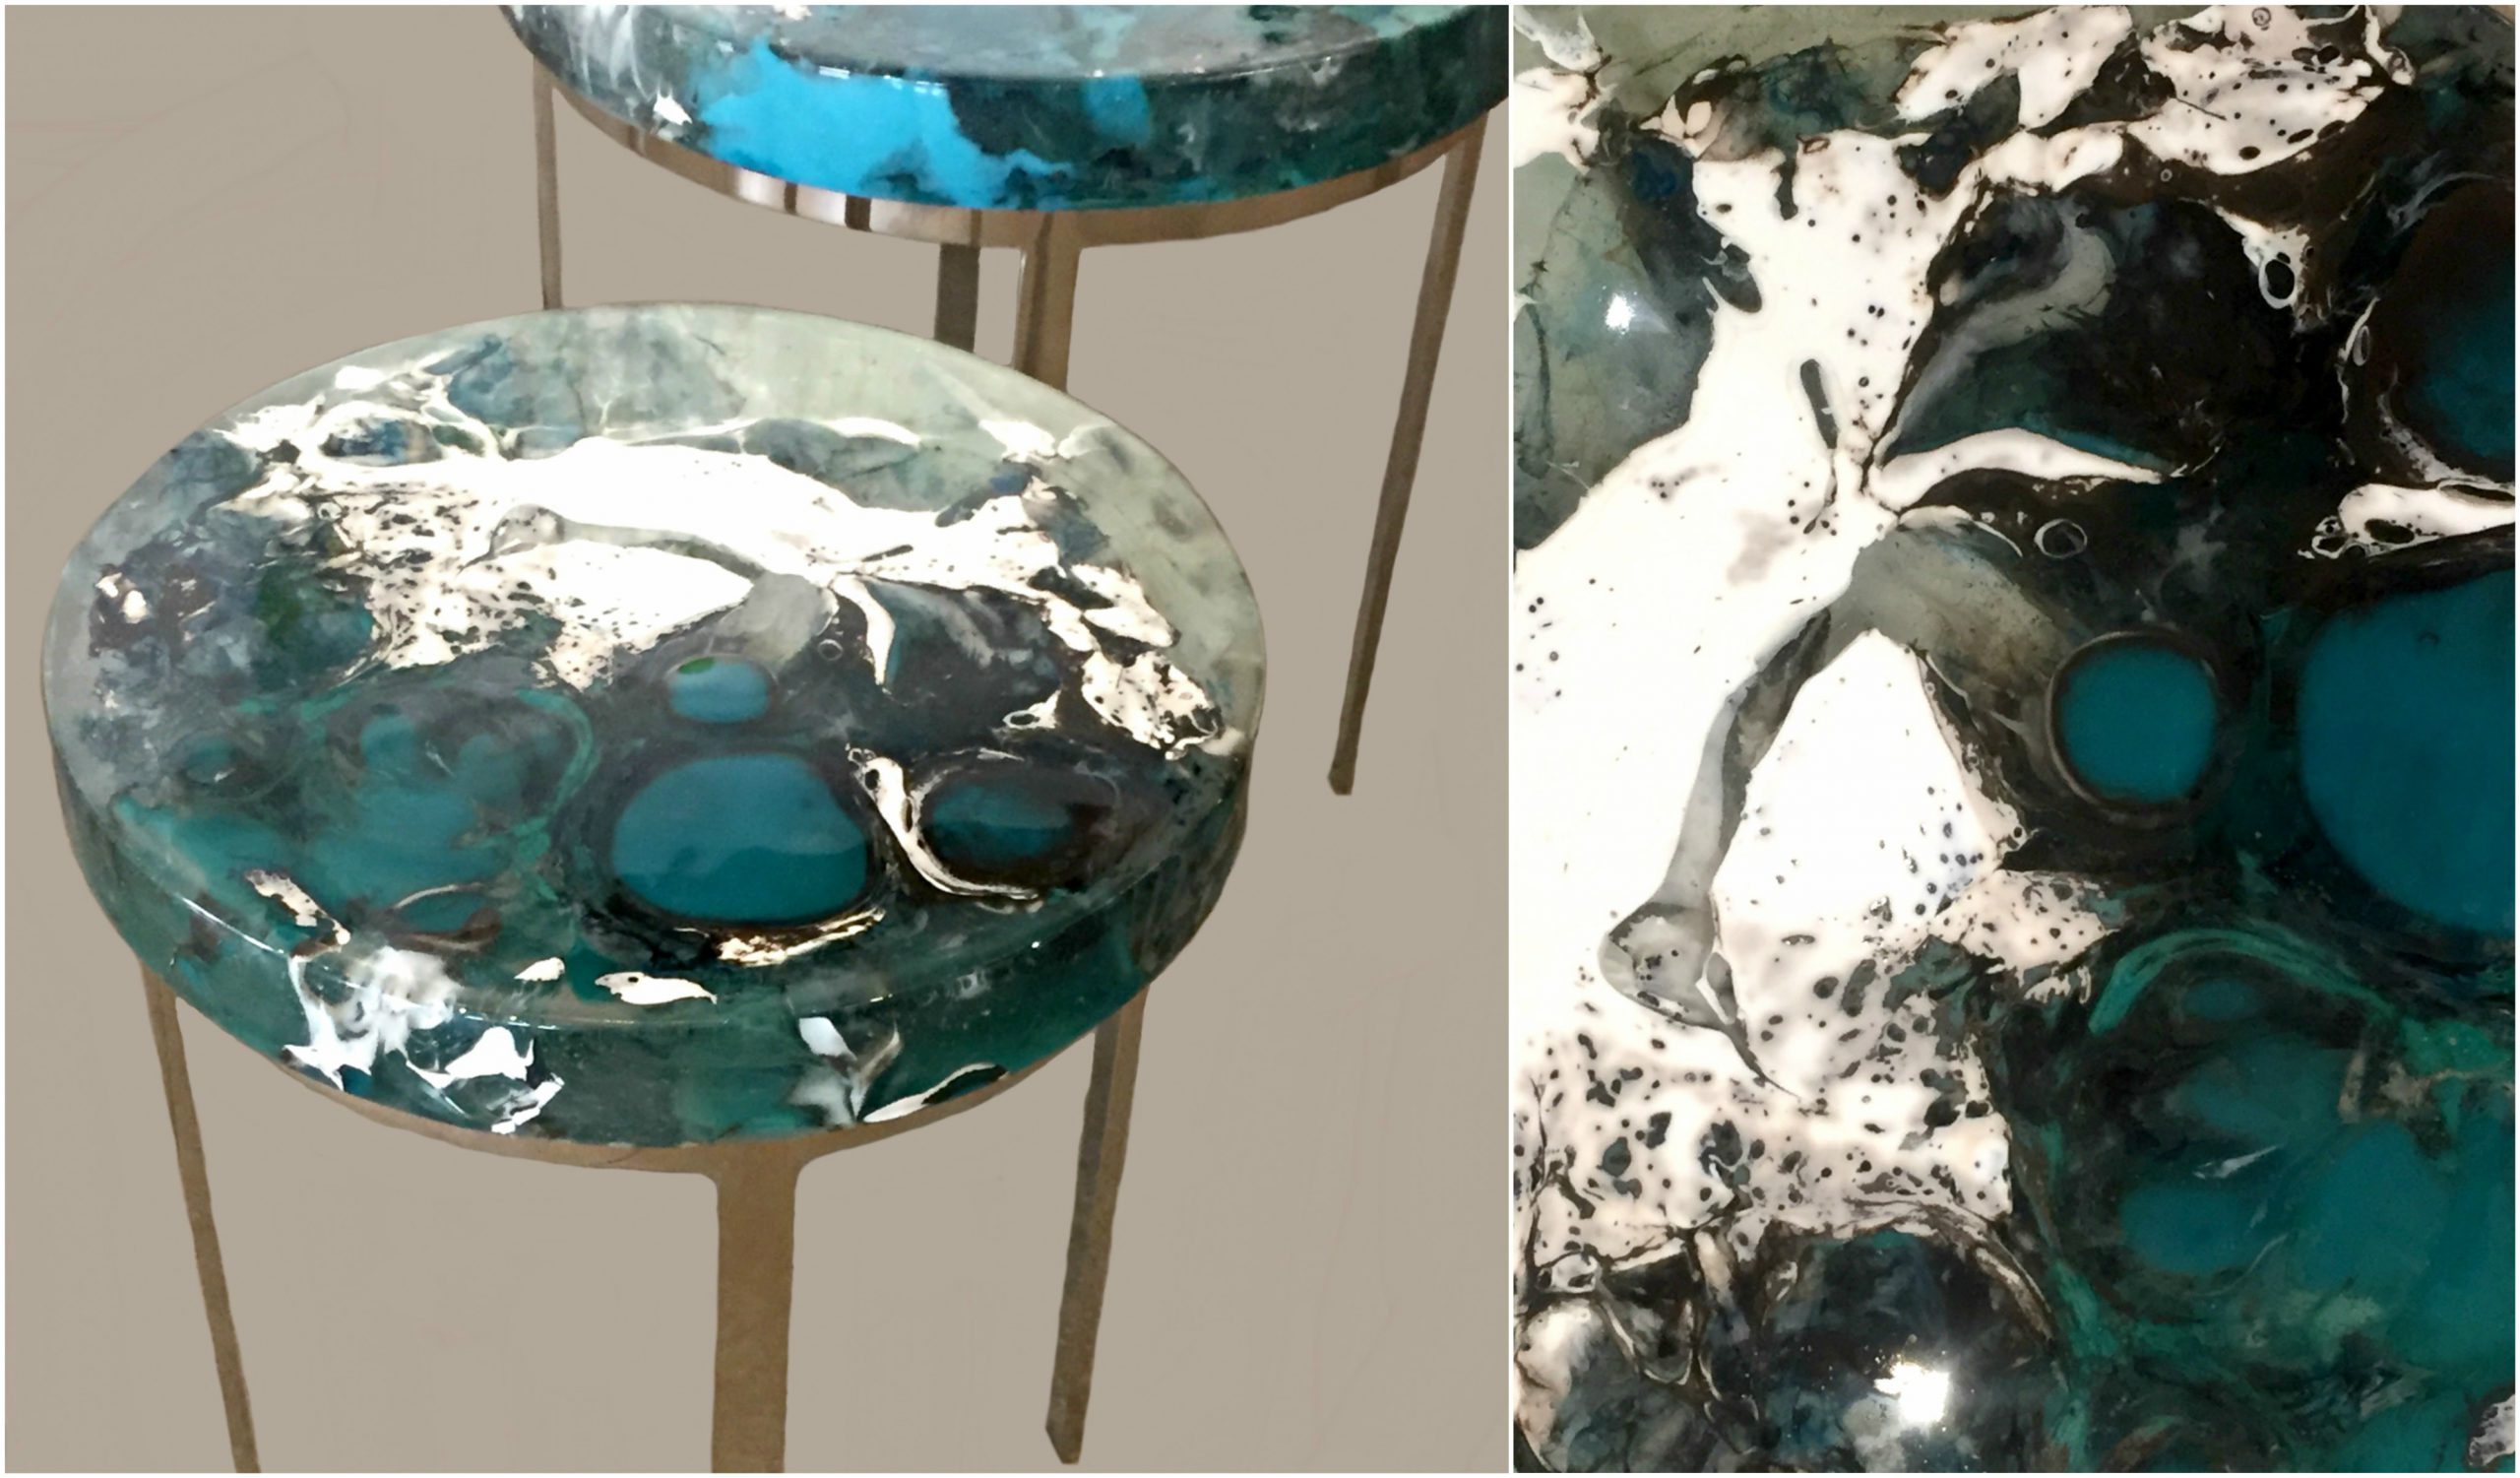 Winter Thaw, cast glass and nickel side table by Heather Cuell | Effusion Art Gallery + Cast Glass Studio, Invermere BC